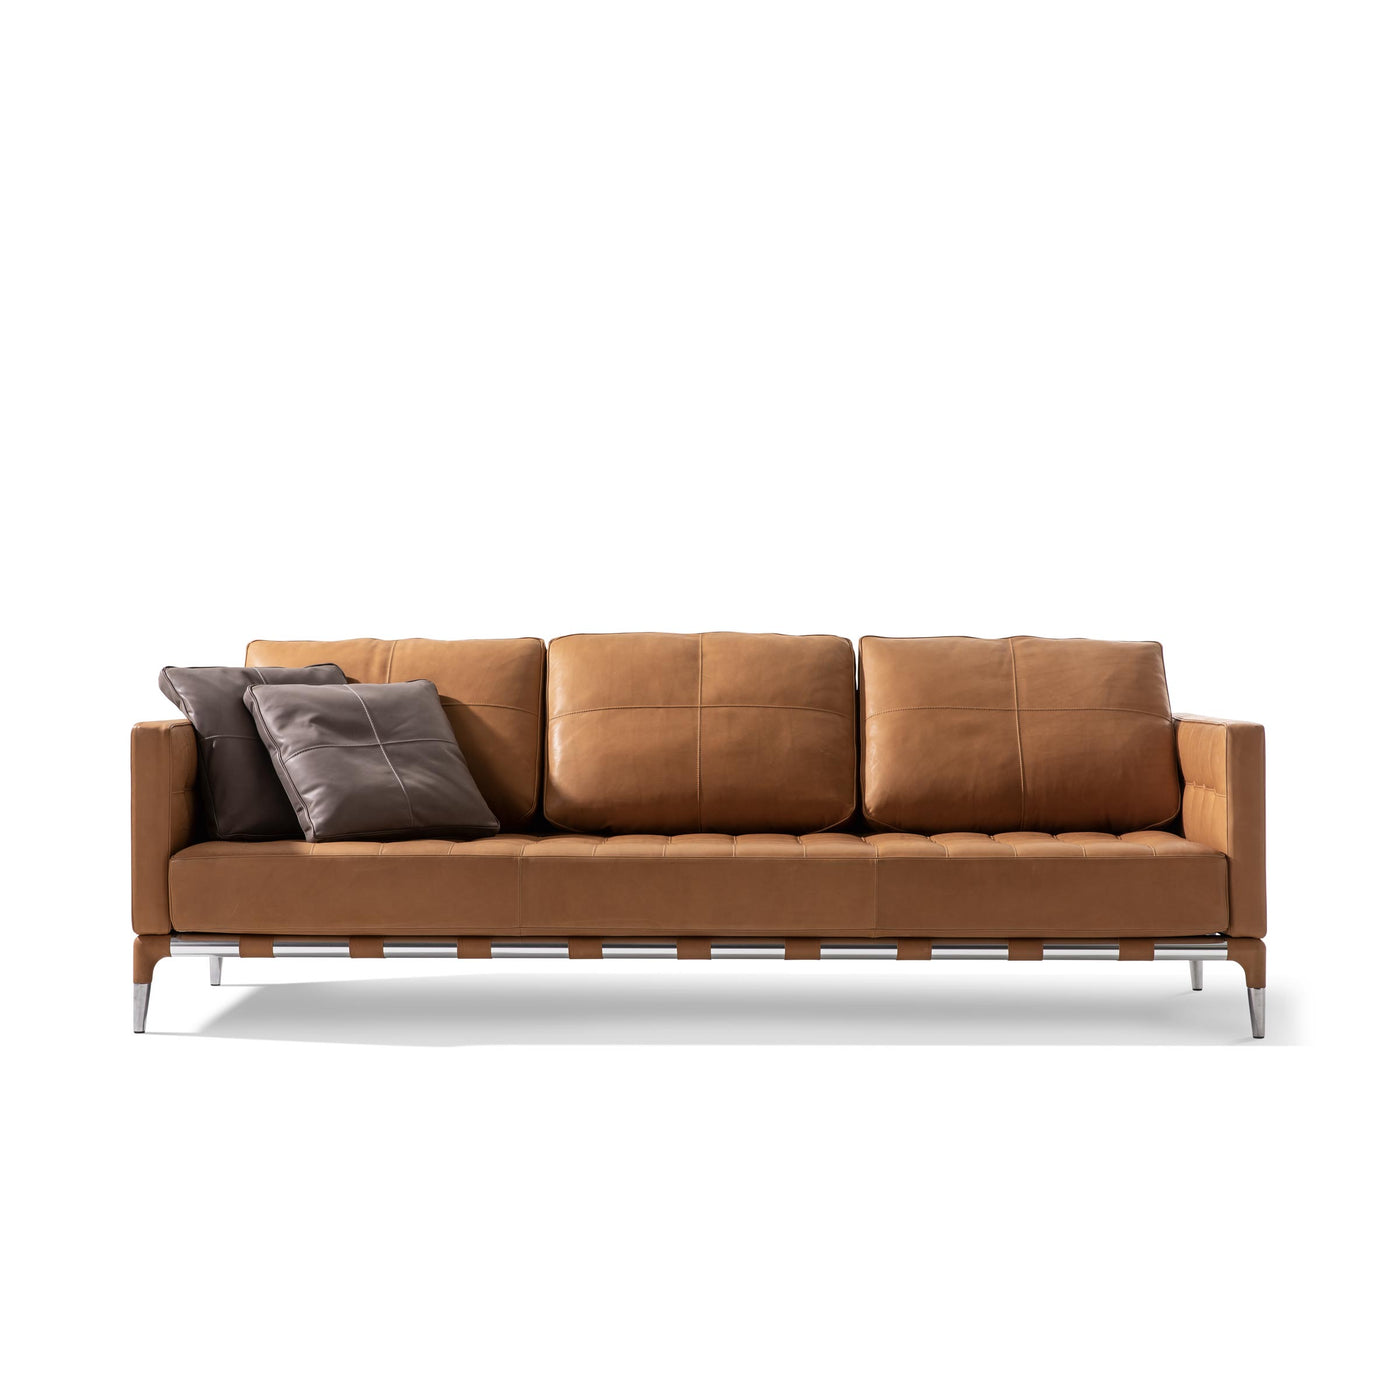 Three-Seater Leather Sofa PRIVE', designed by Philippe Starck for Cassina 01